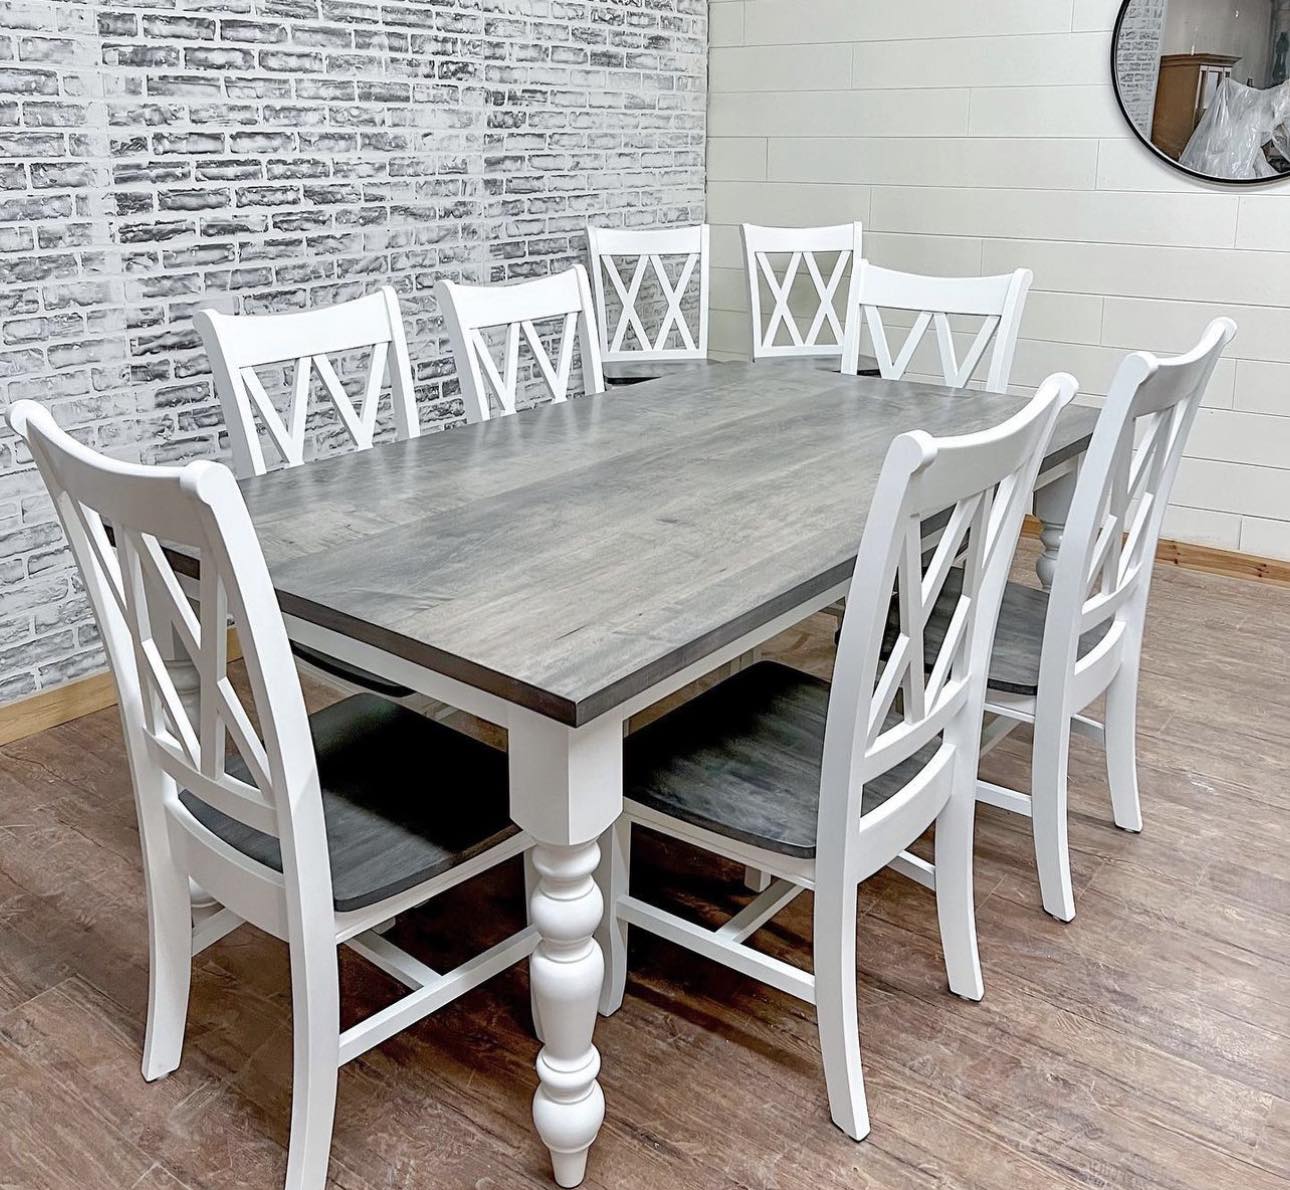 6' L x 42" W Maple Traditional Husky Dining Table with 6 Double Cross Back Chairs